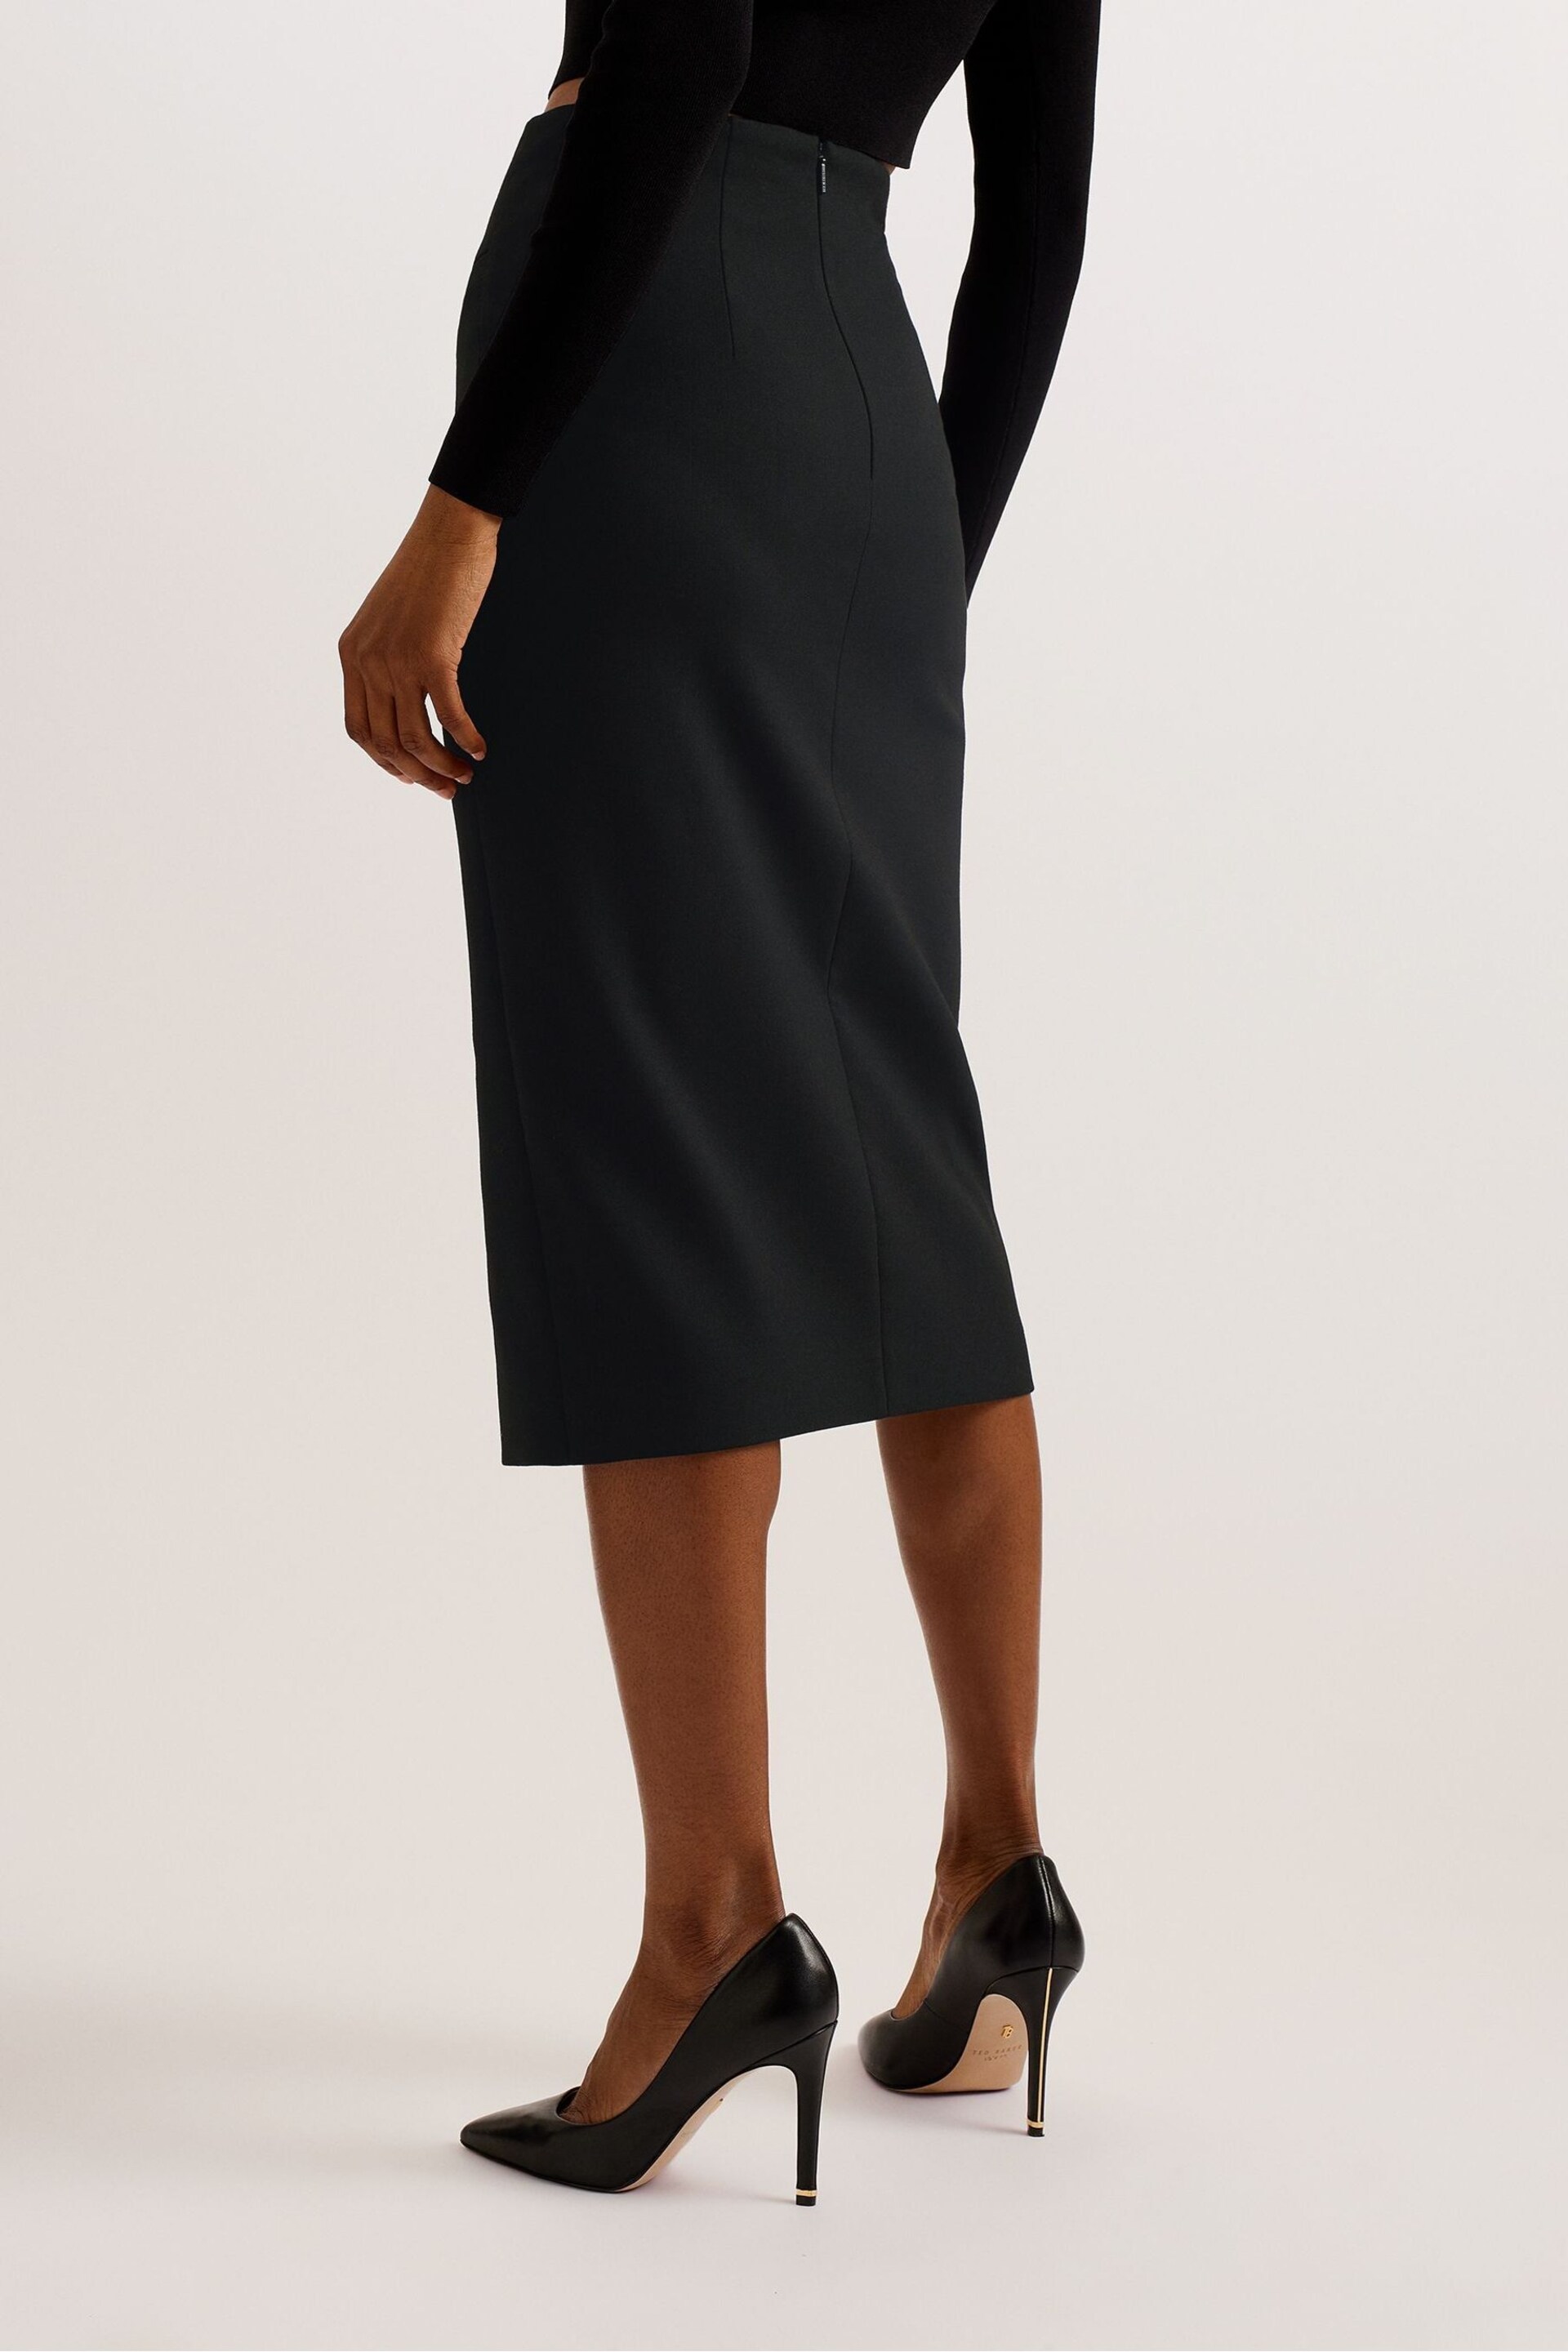 Ted Baker Black Manabus Tailored Midi Skirt With Front Split - Image 3 of 5